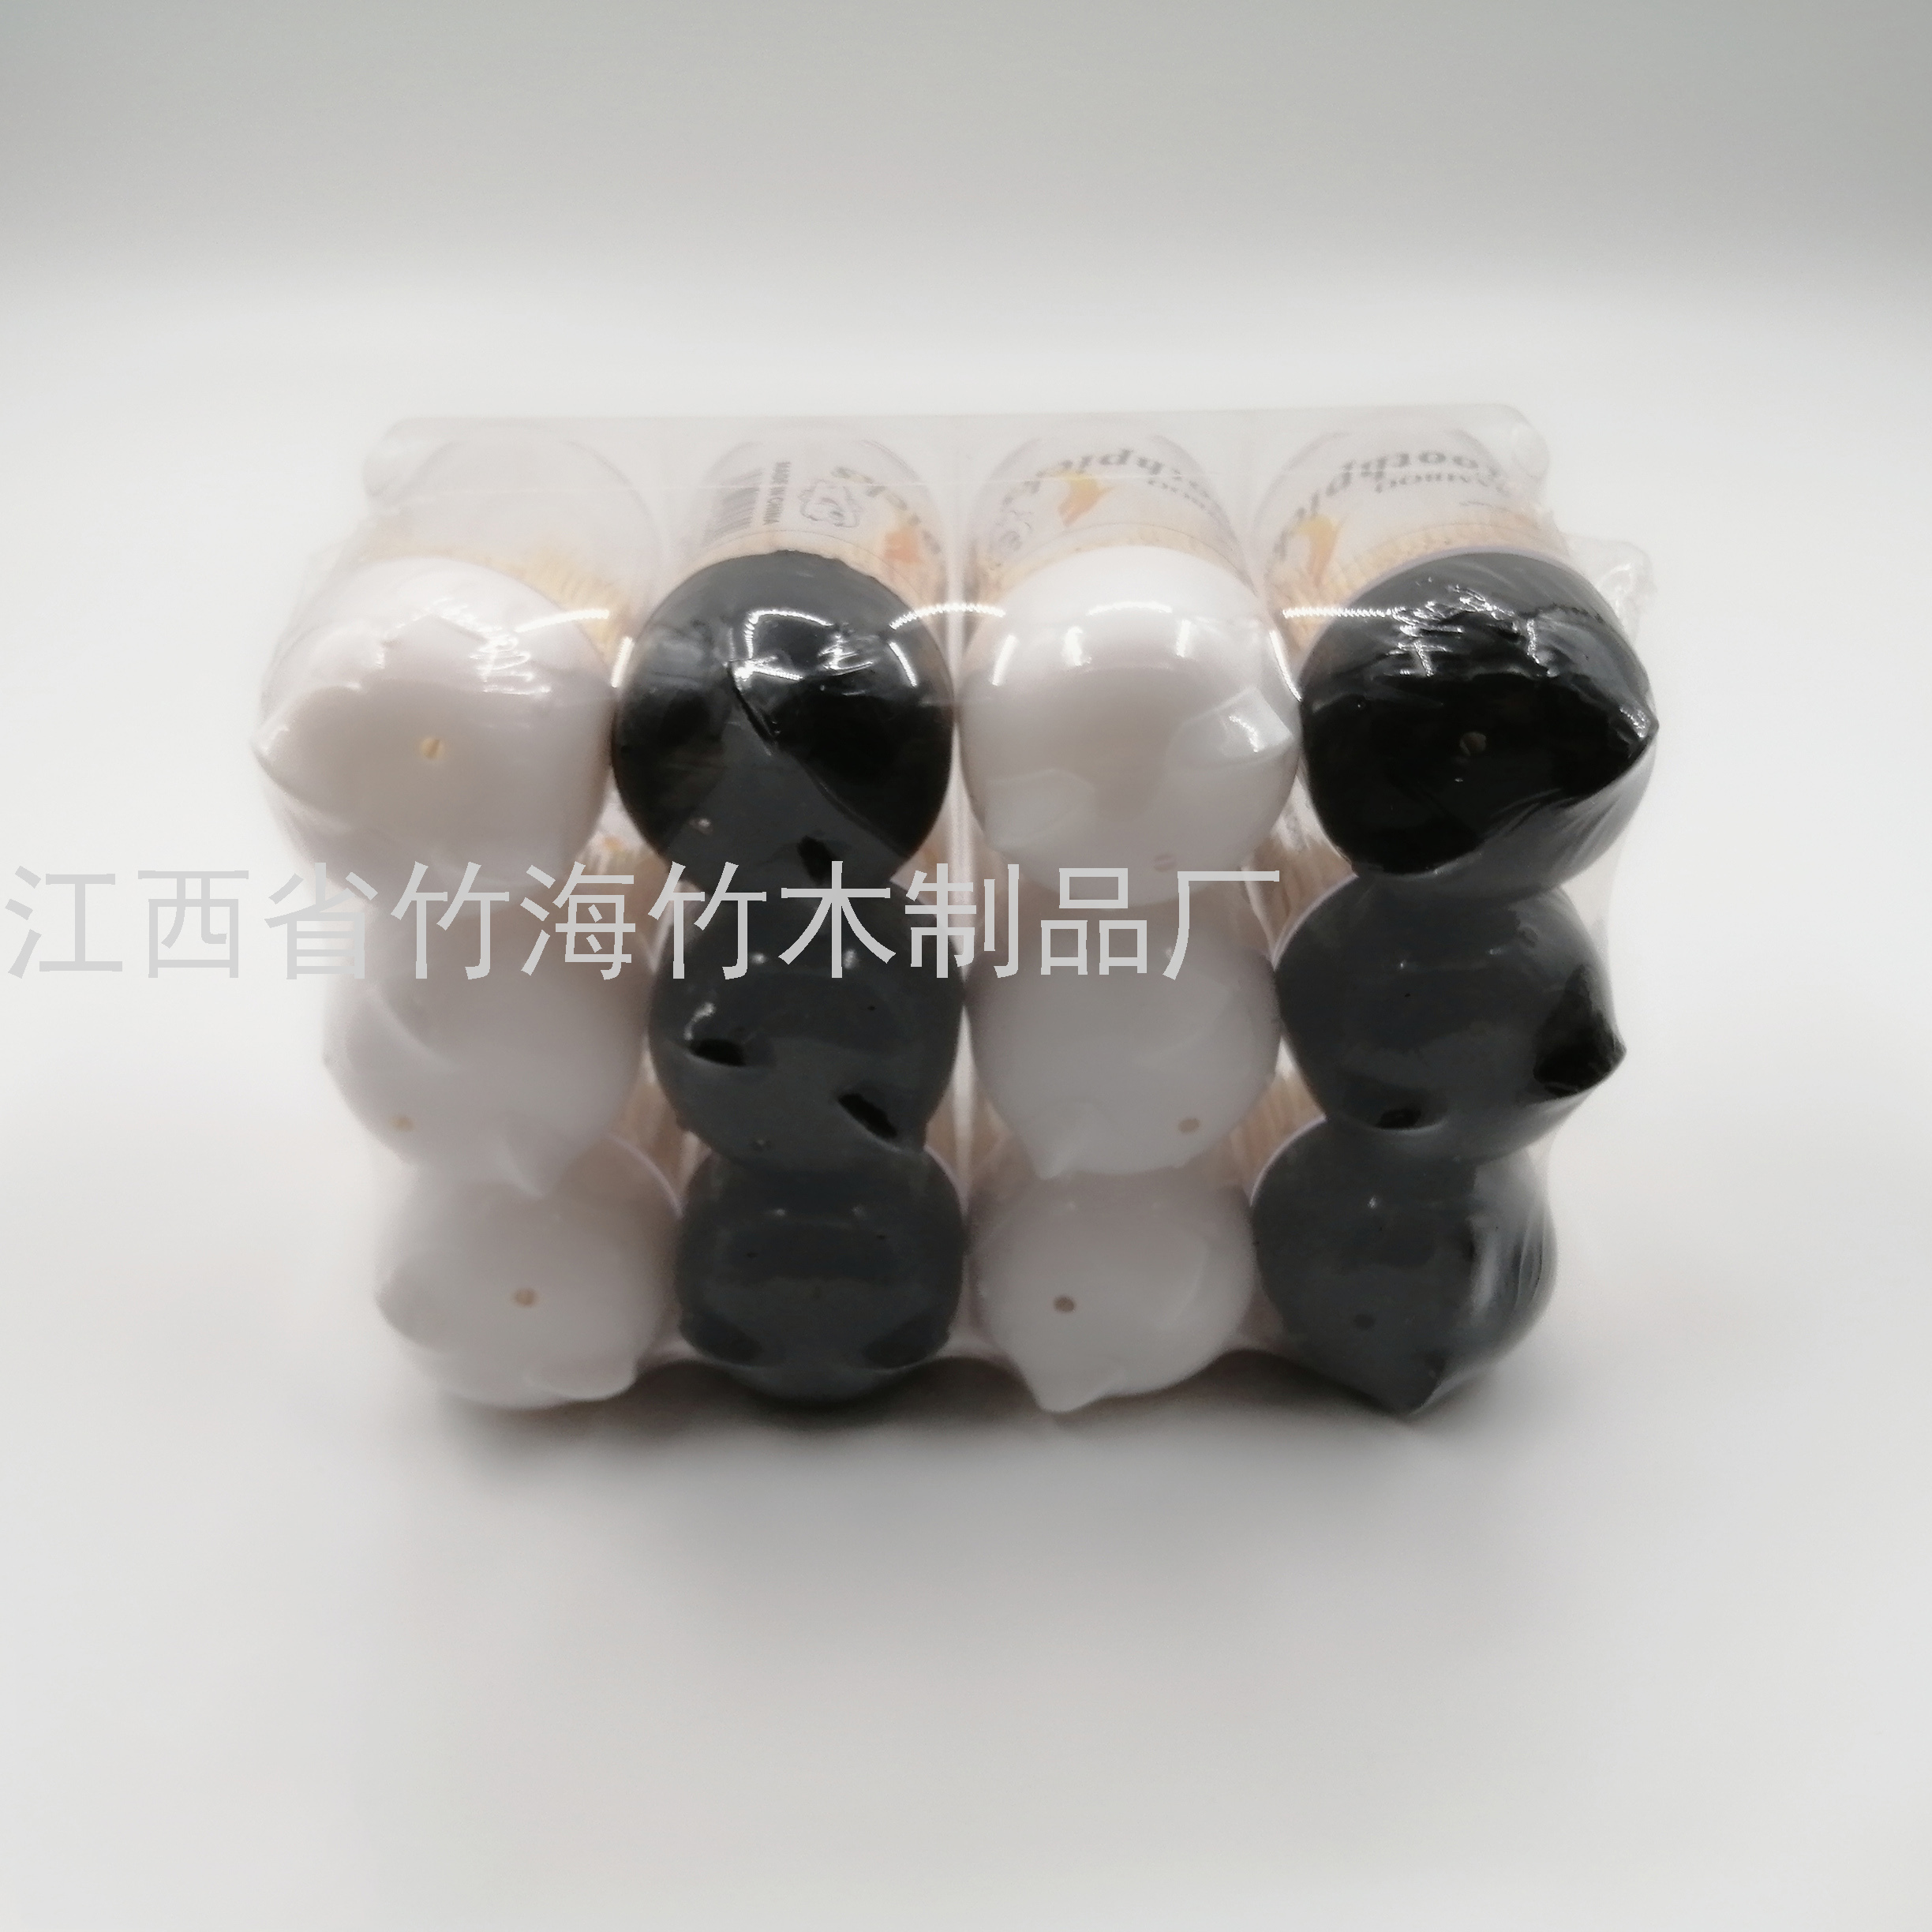 Product Image Gallery